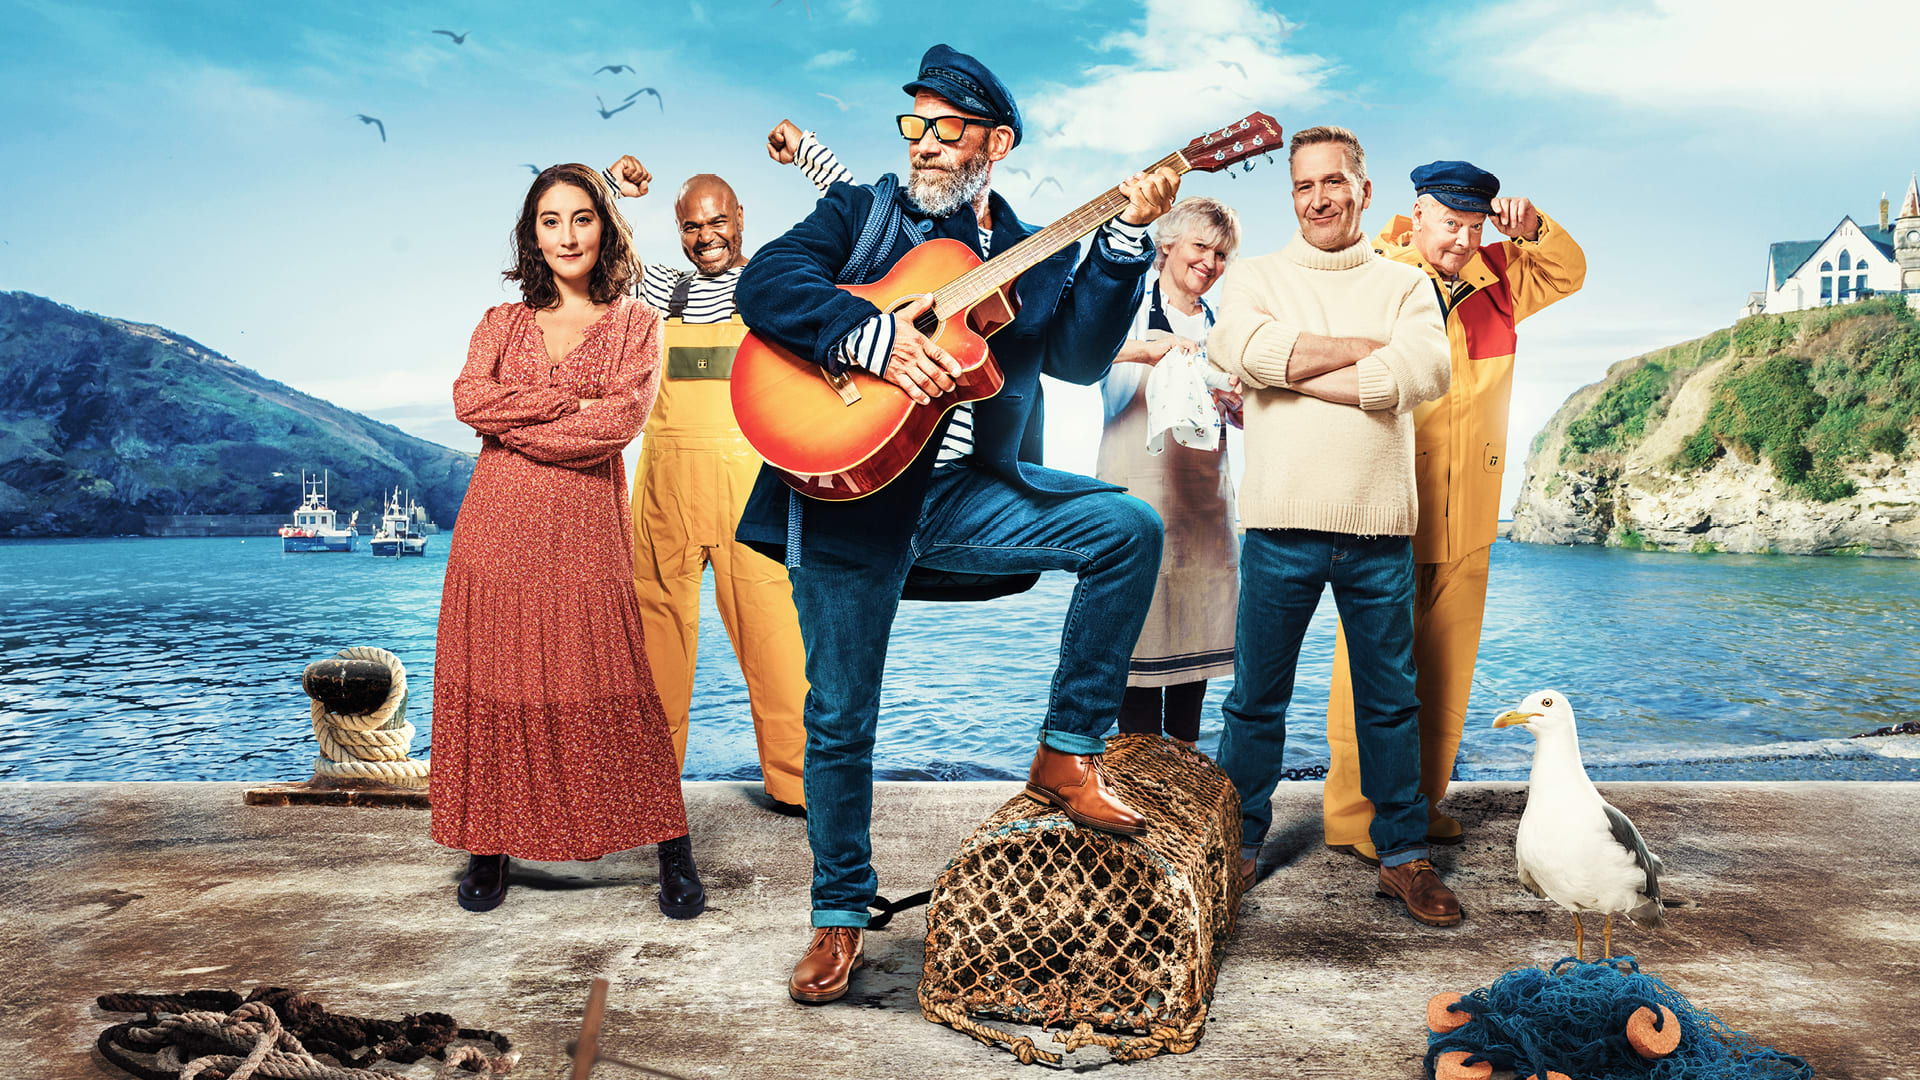 Fisherman's Friends The Musical Tickets New Wimbledon Theatre in